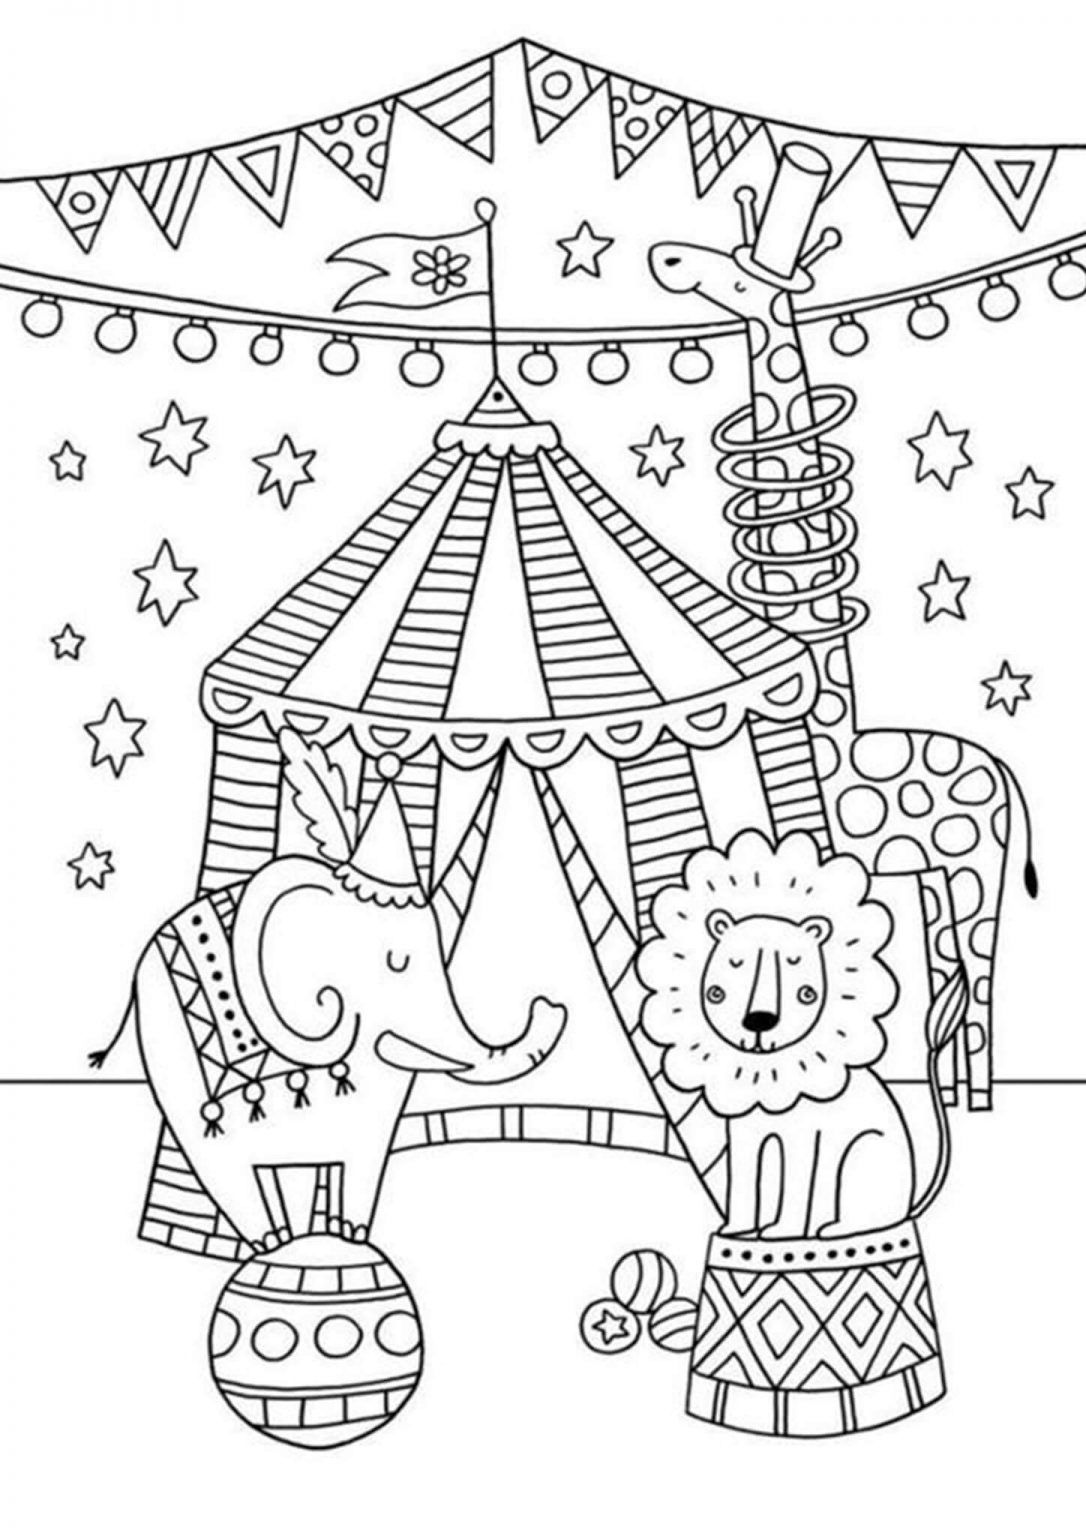 Free easy to print circus coloring pages circus crafts coloring pages circus theme preschool